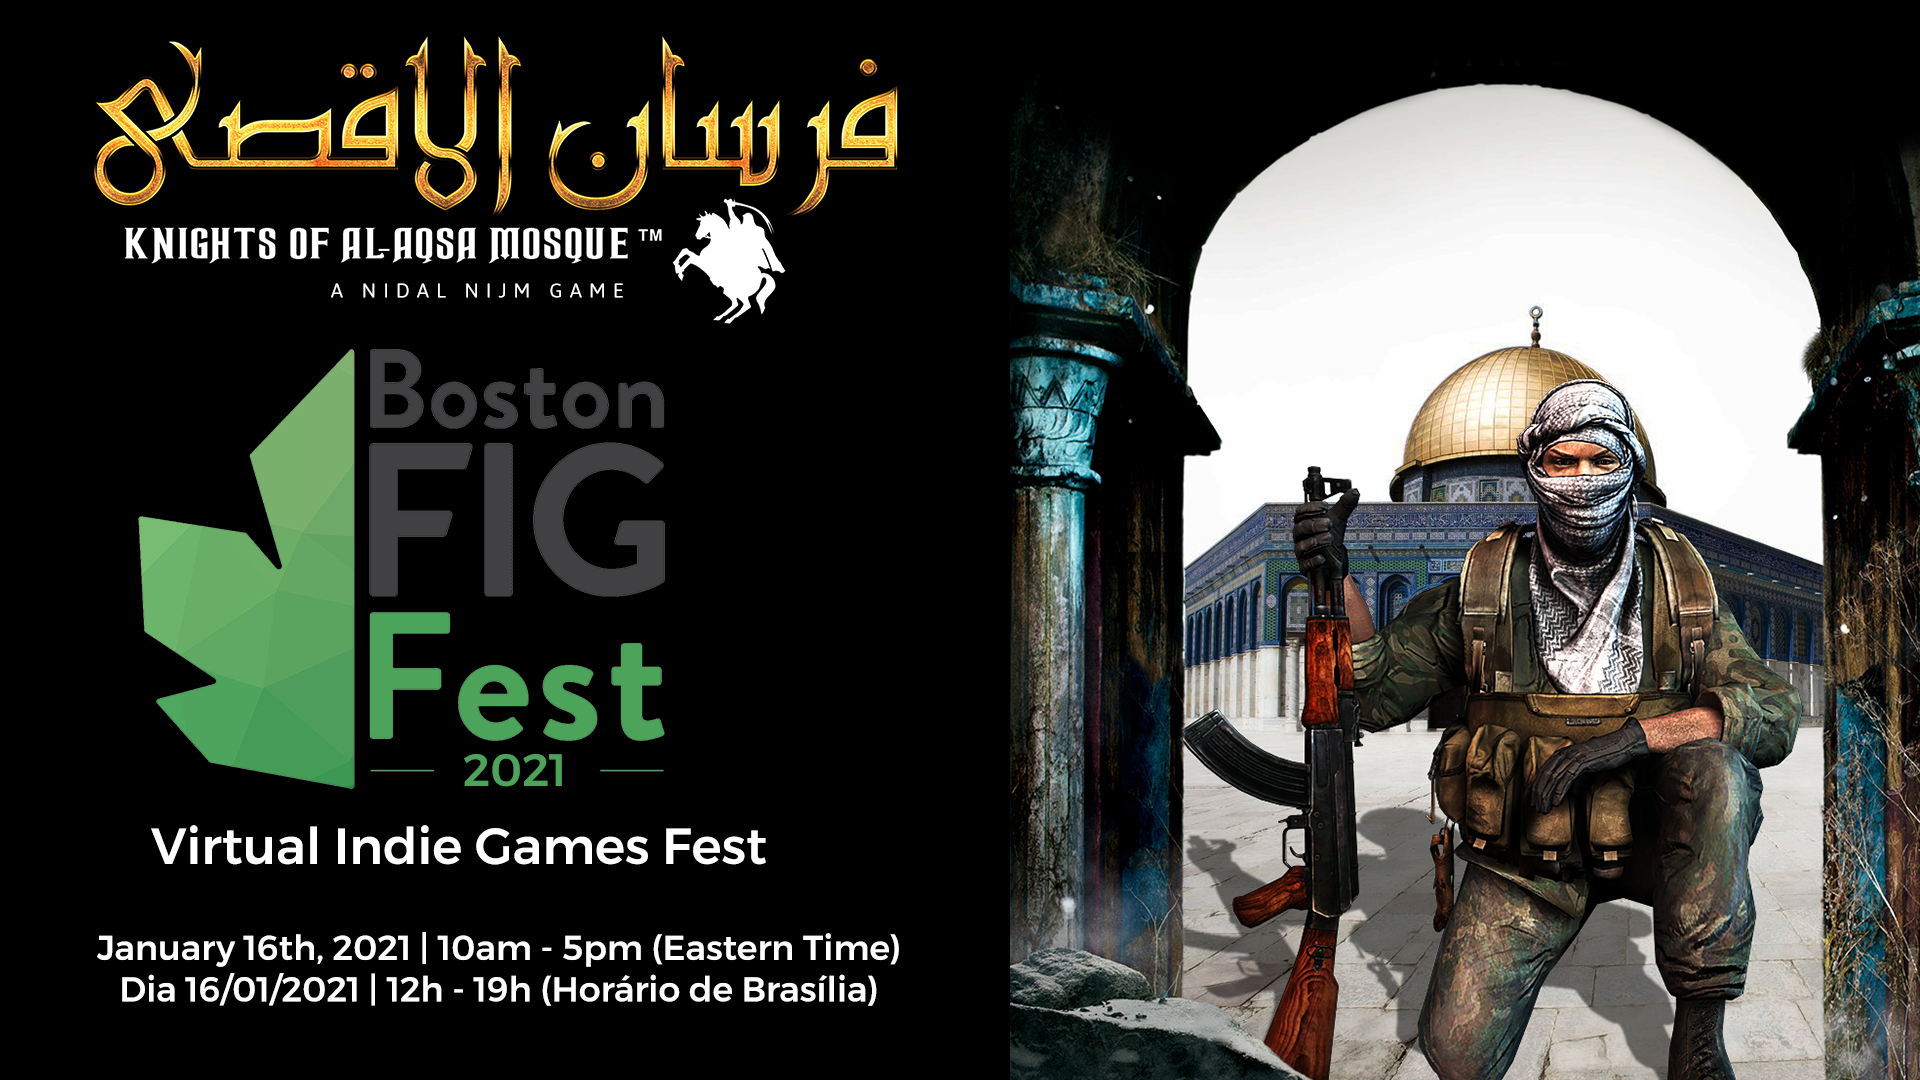 fursan aqsa bostonfig 2021 final 1 - I am developing a game about Palestine Resistance